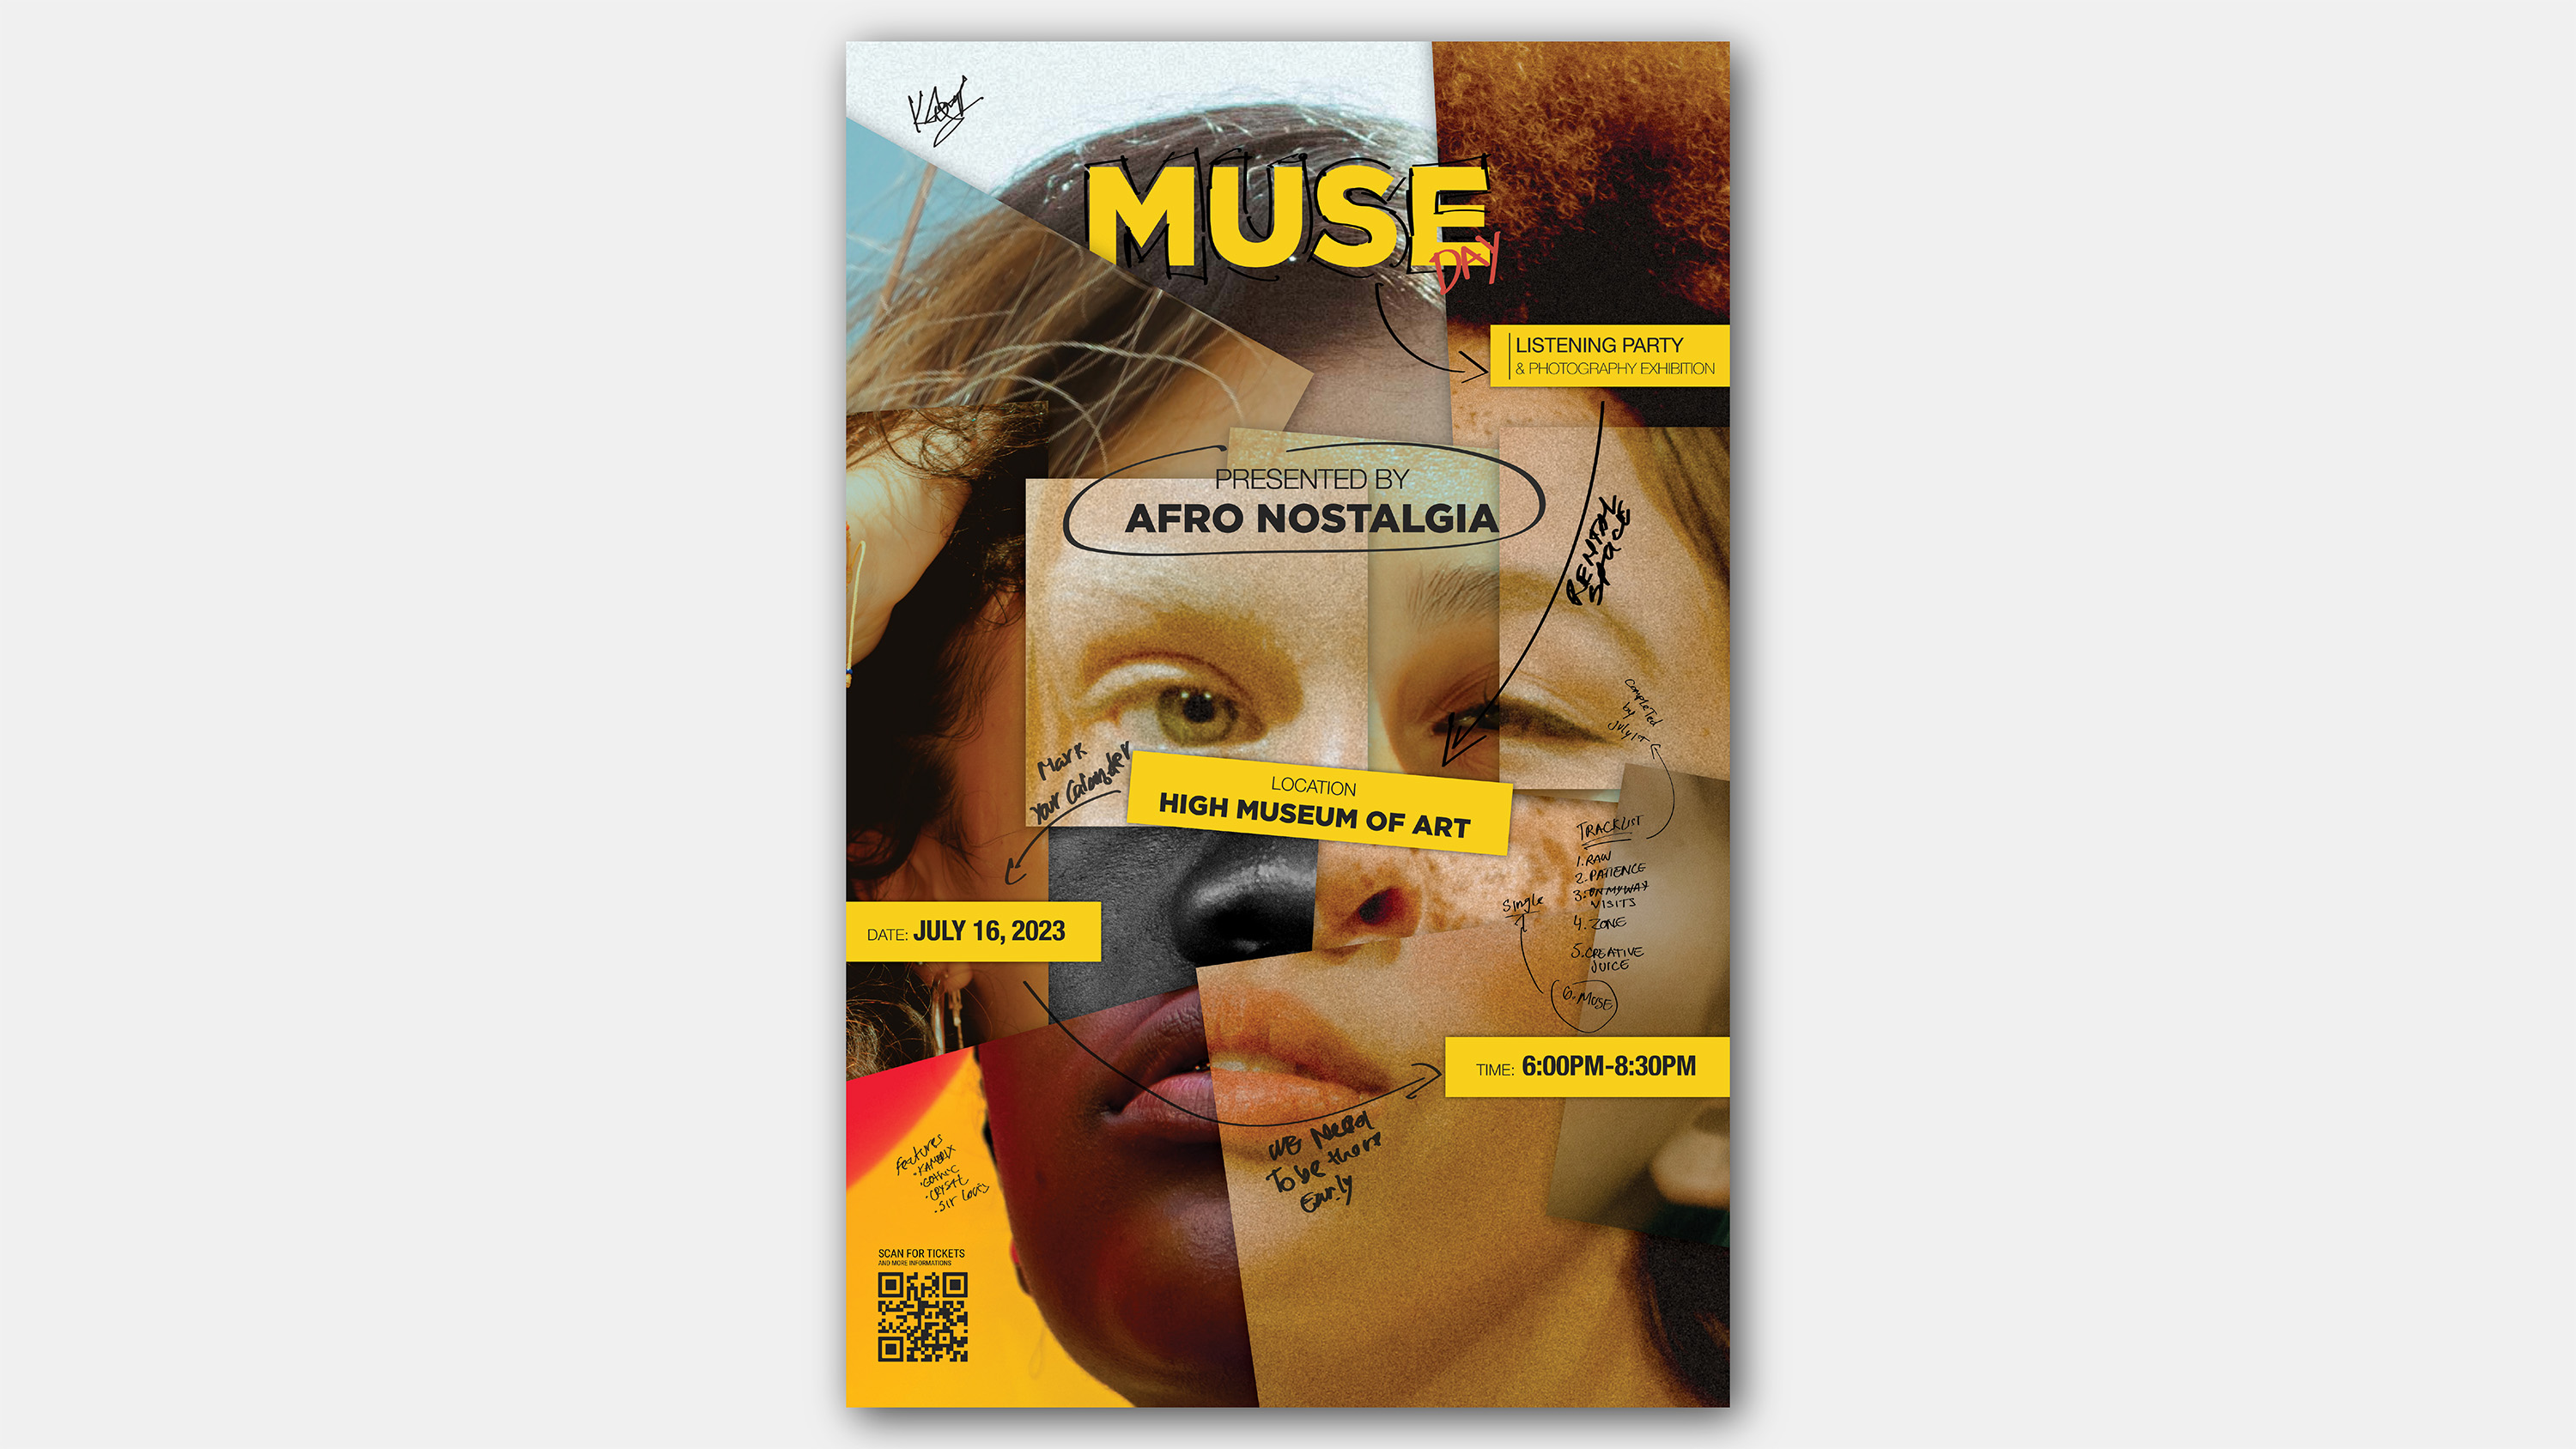 Muse Day / "Muse Day," poster design, 11 x 17 inches, 2022. This poster is designed to advertise an art event.